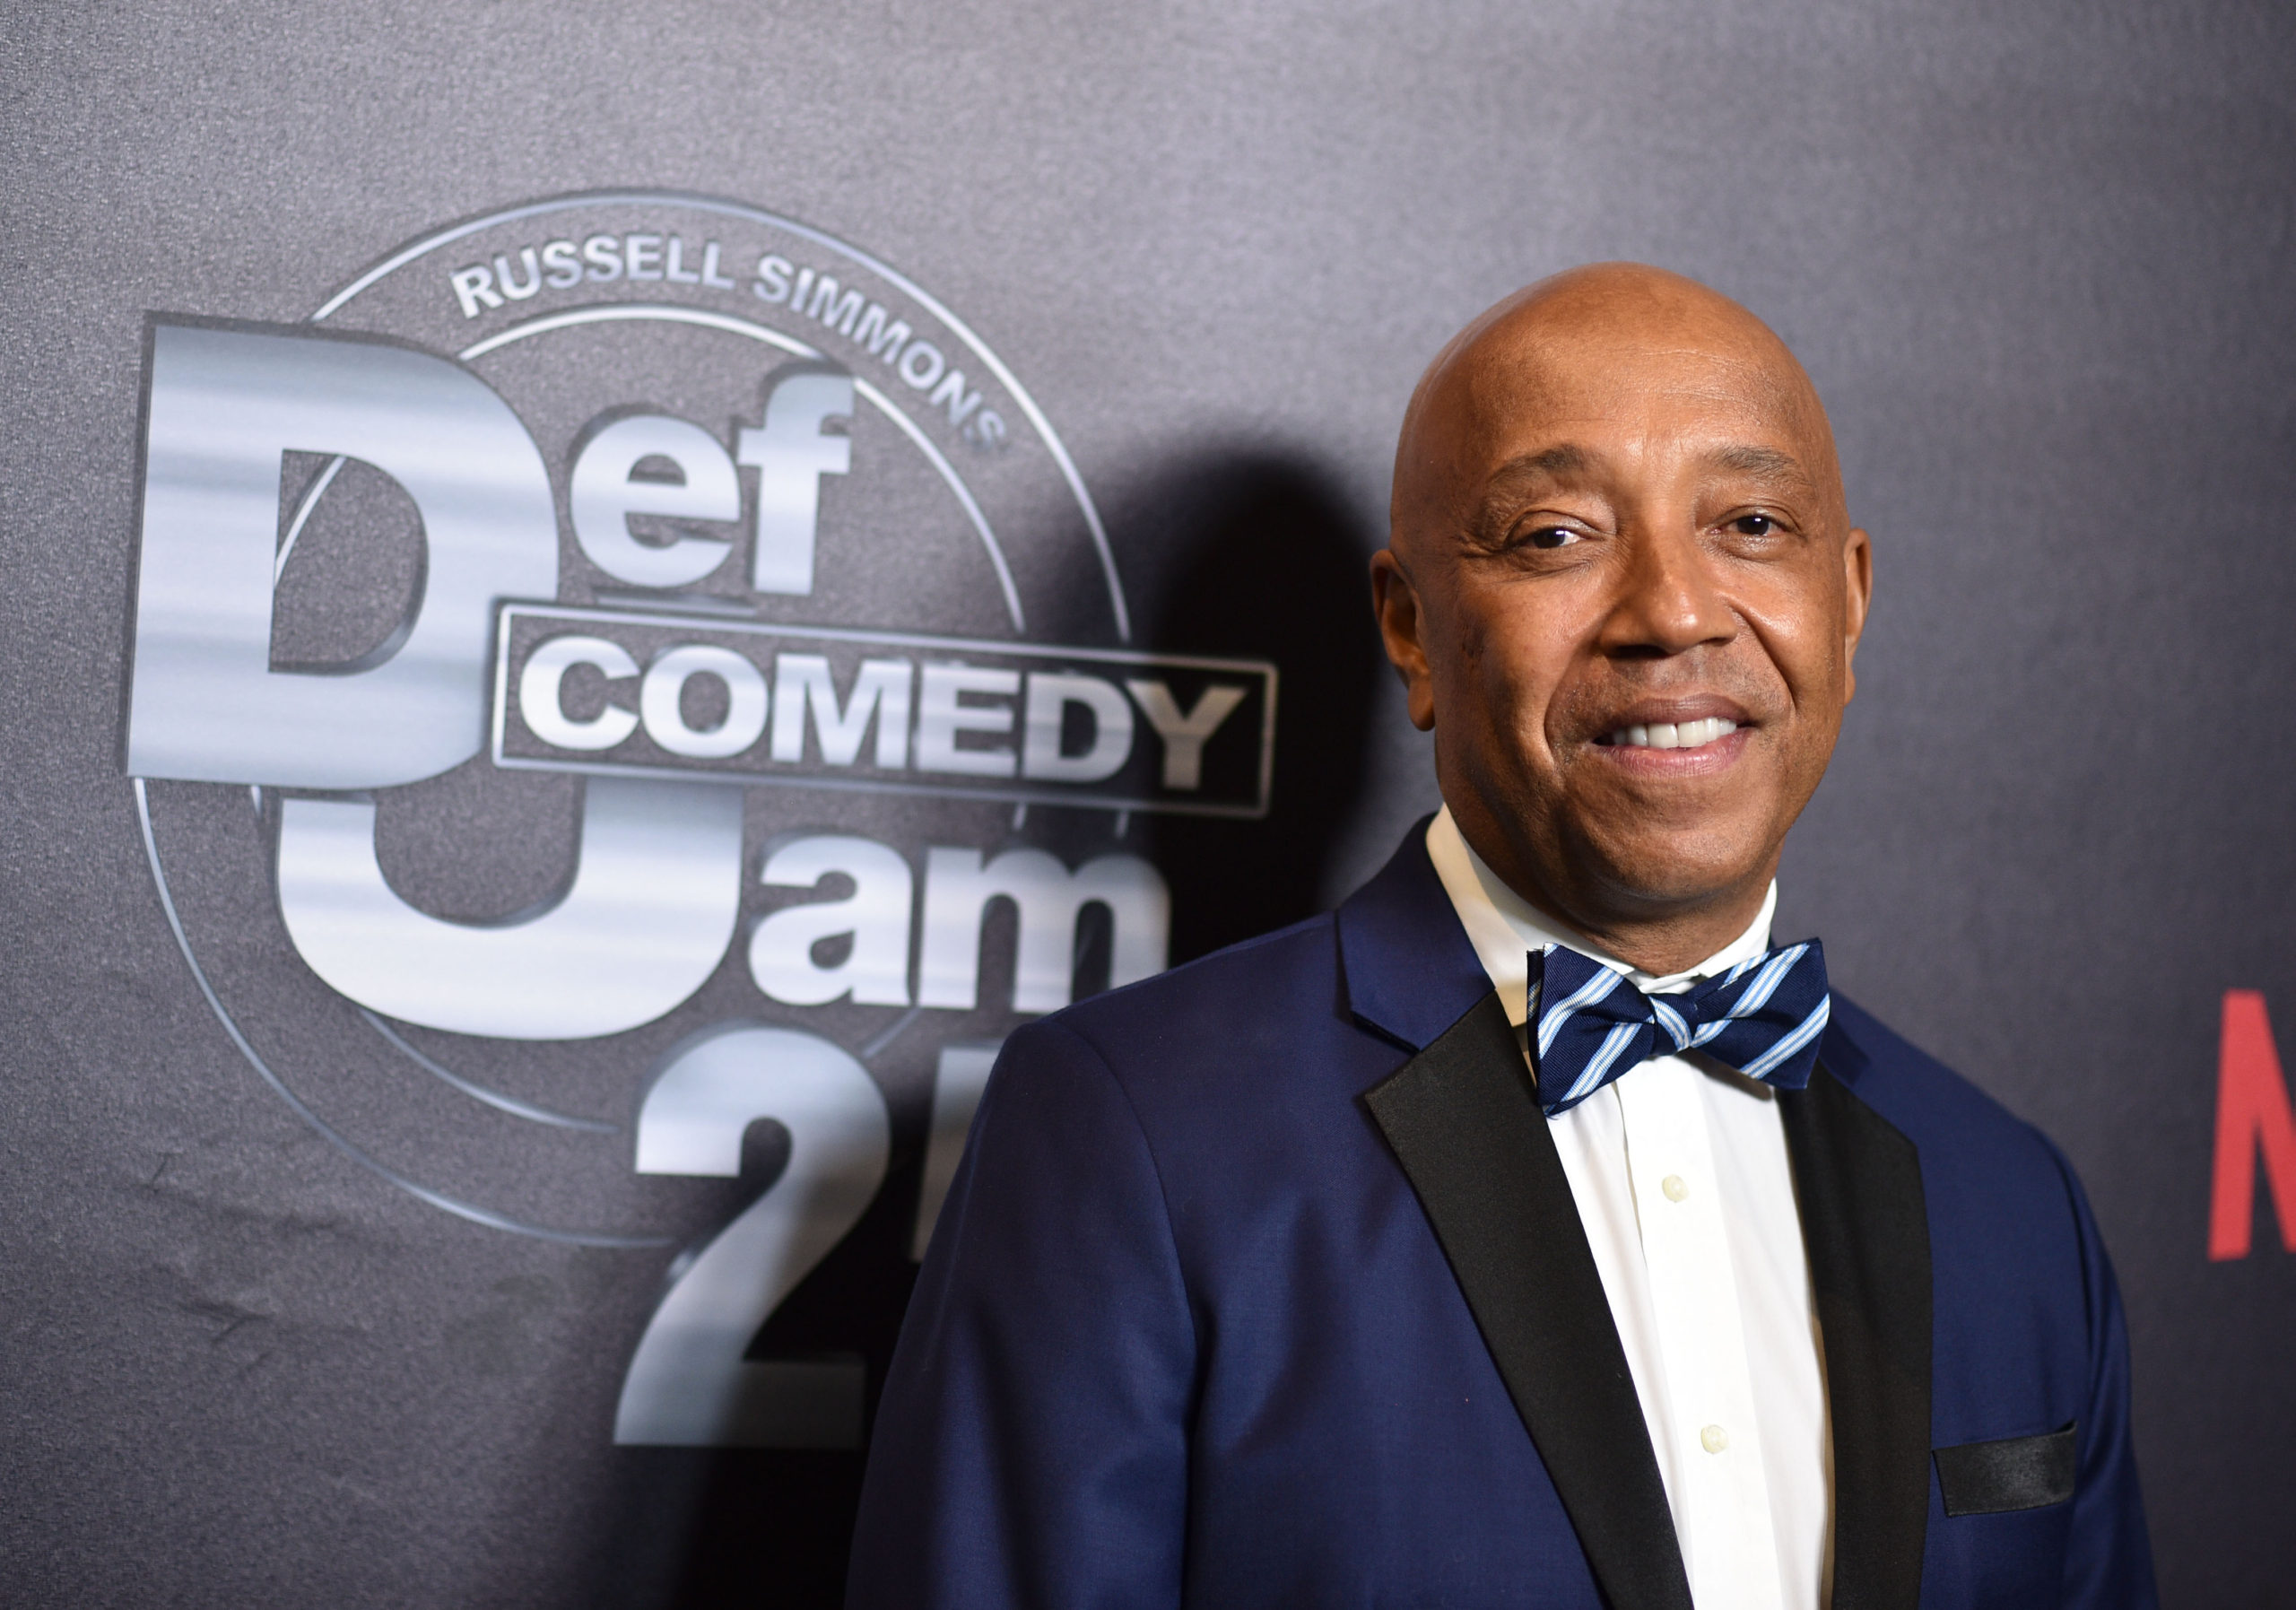 Russell Simmons' Anonymous Rape Accusers Loses Lawsuit Because Claims Fell Outside The Statute of Limitations